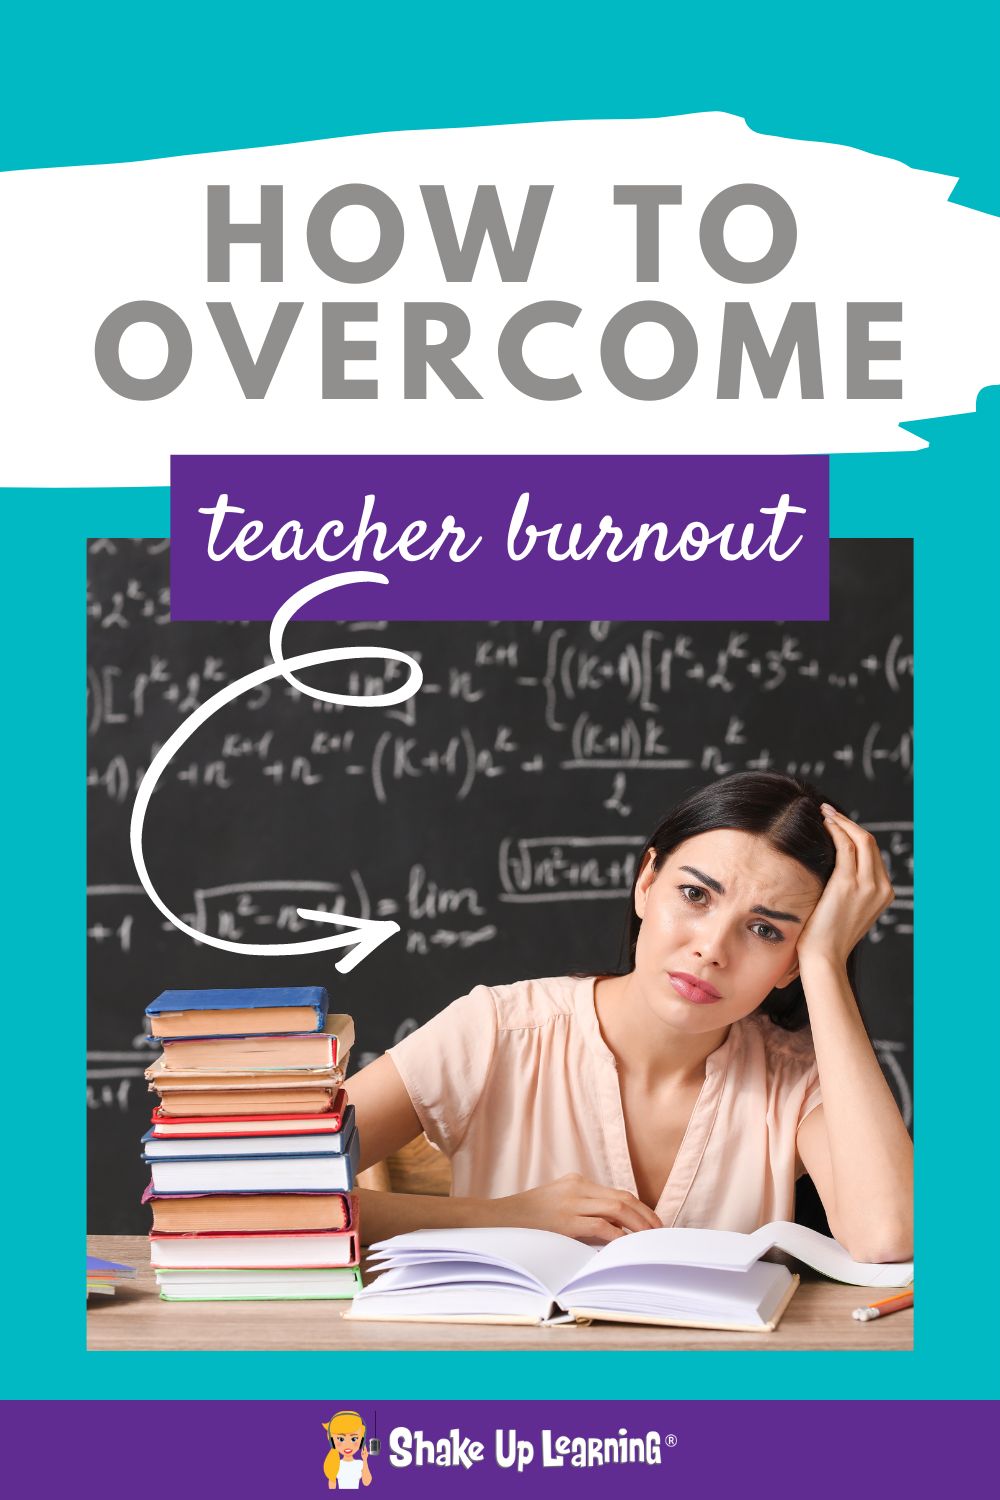 Feeling burnout? In this episode, Kasey chats with Amber Harper from the Burned-In Teacher podcast. Amber shares strategies to help teachers avoid toxic influences, improve their mindset, and take steps to overcome teacher burnout. This is more than a bubble bath and going for a walk, take radical steps to set boundaries and do what's best for you and your students.